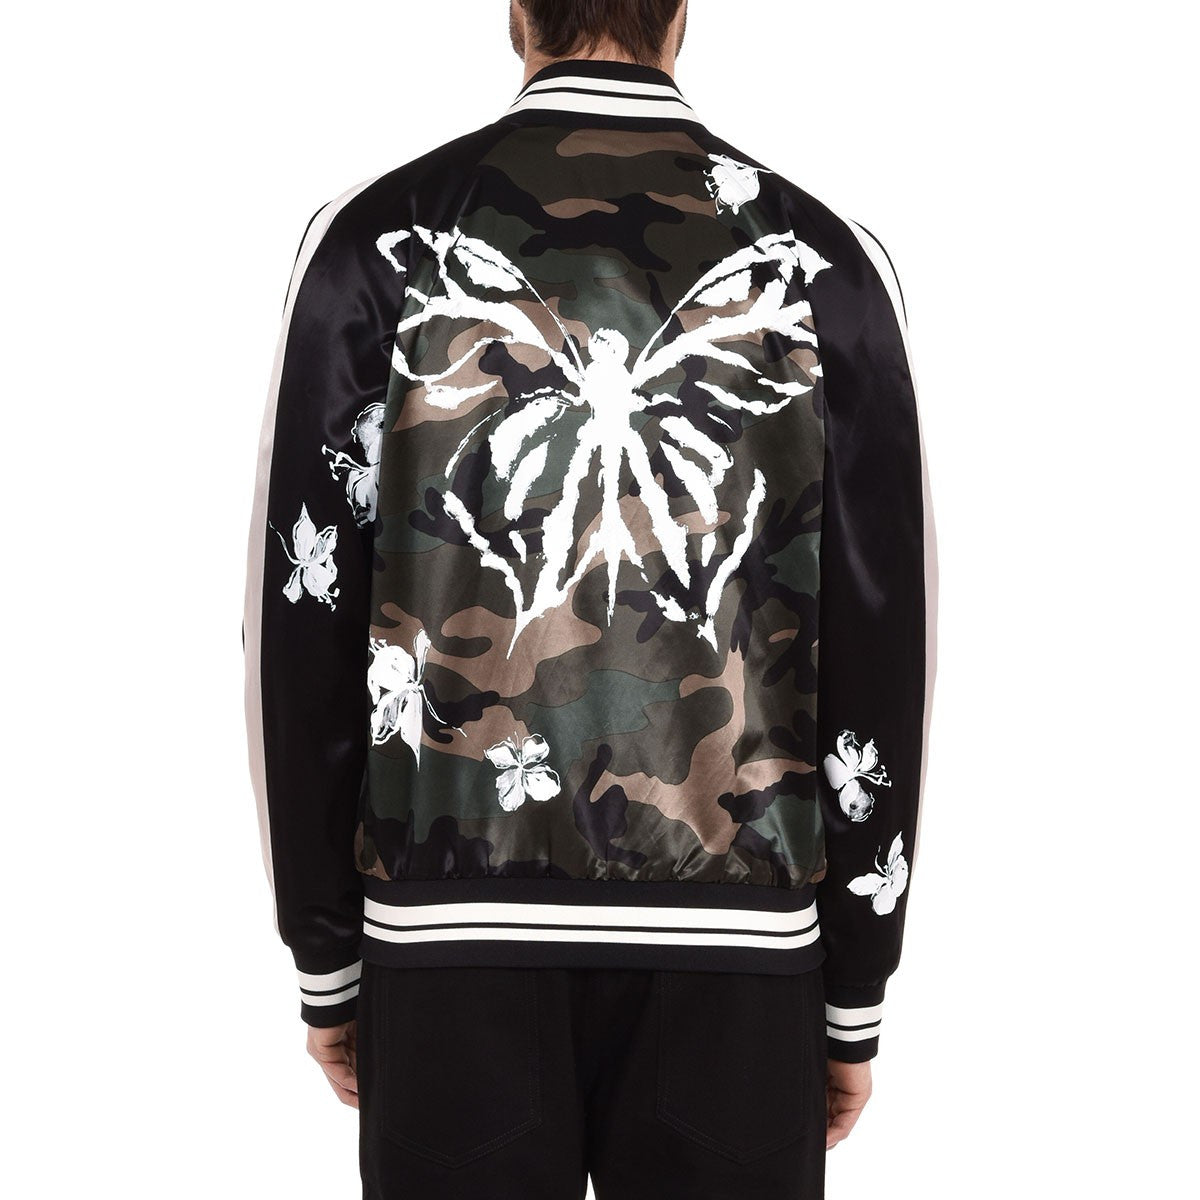 Butterfly Bomber Jacket Camo – The Business Fashion